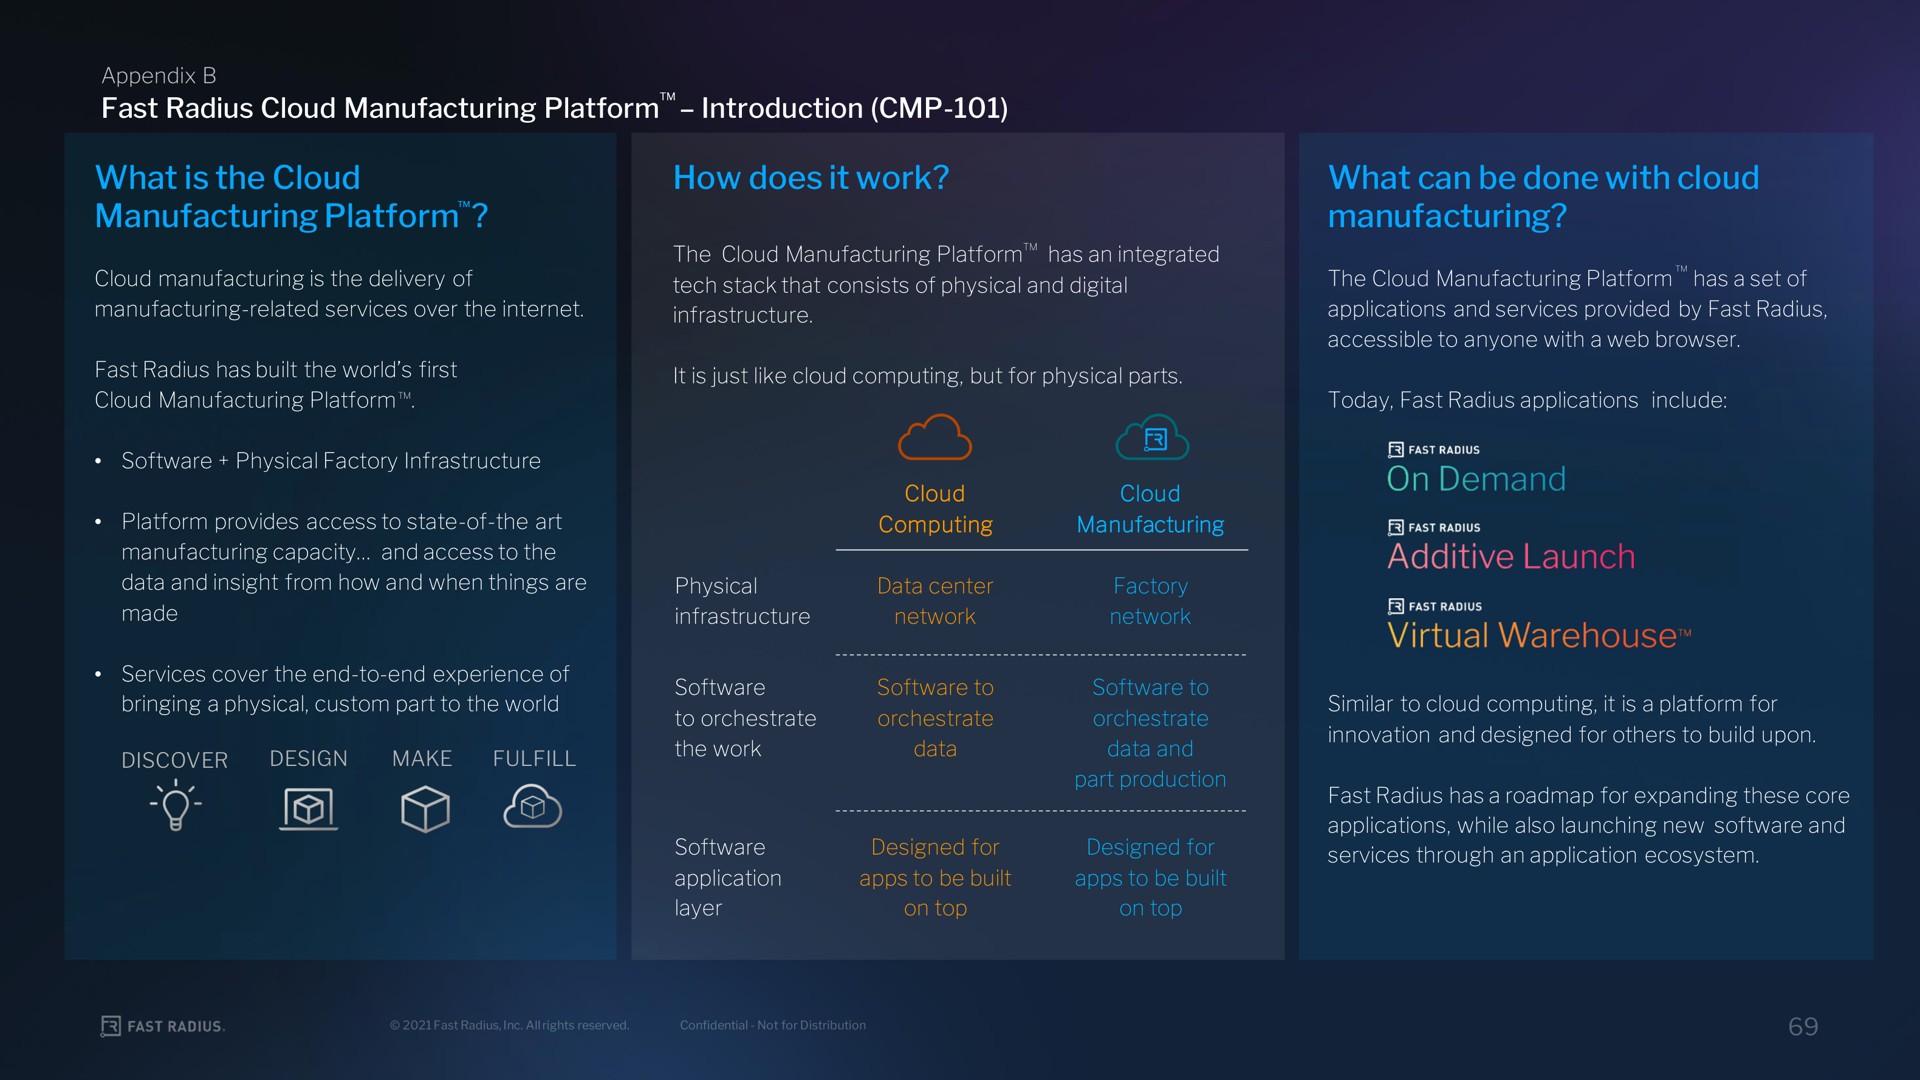 what is the cloud manufacturing platform how does it work what can be done with cloud manufacturing fast radius introduction cee on demand additive launch virtual warehouse | Fast Radius